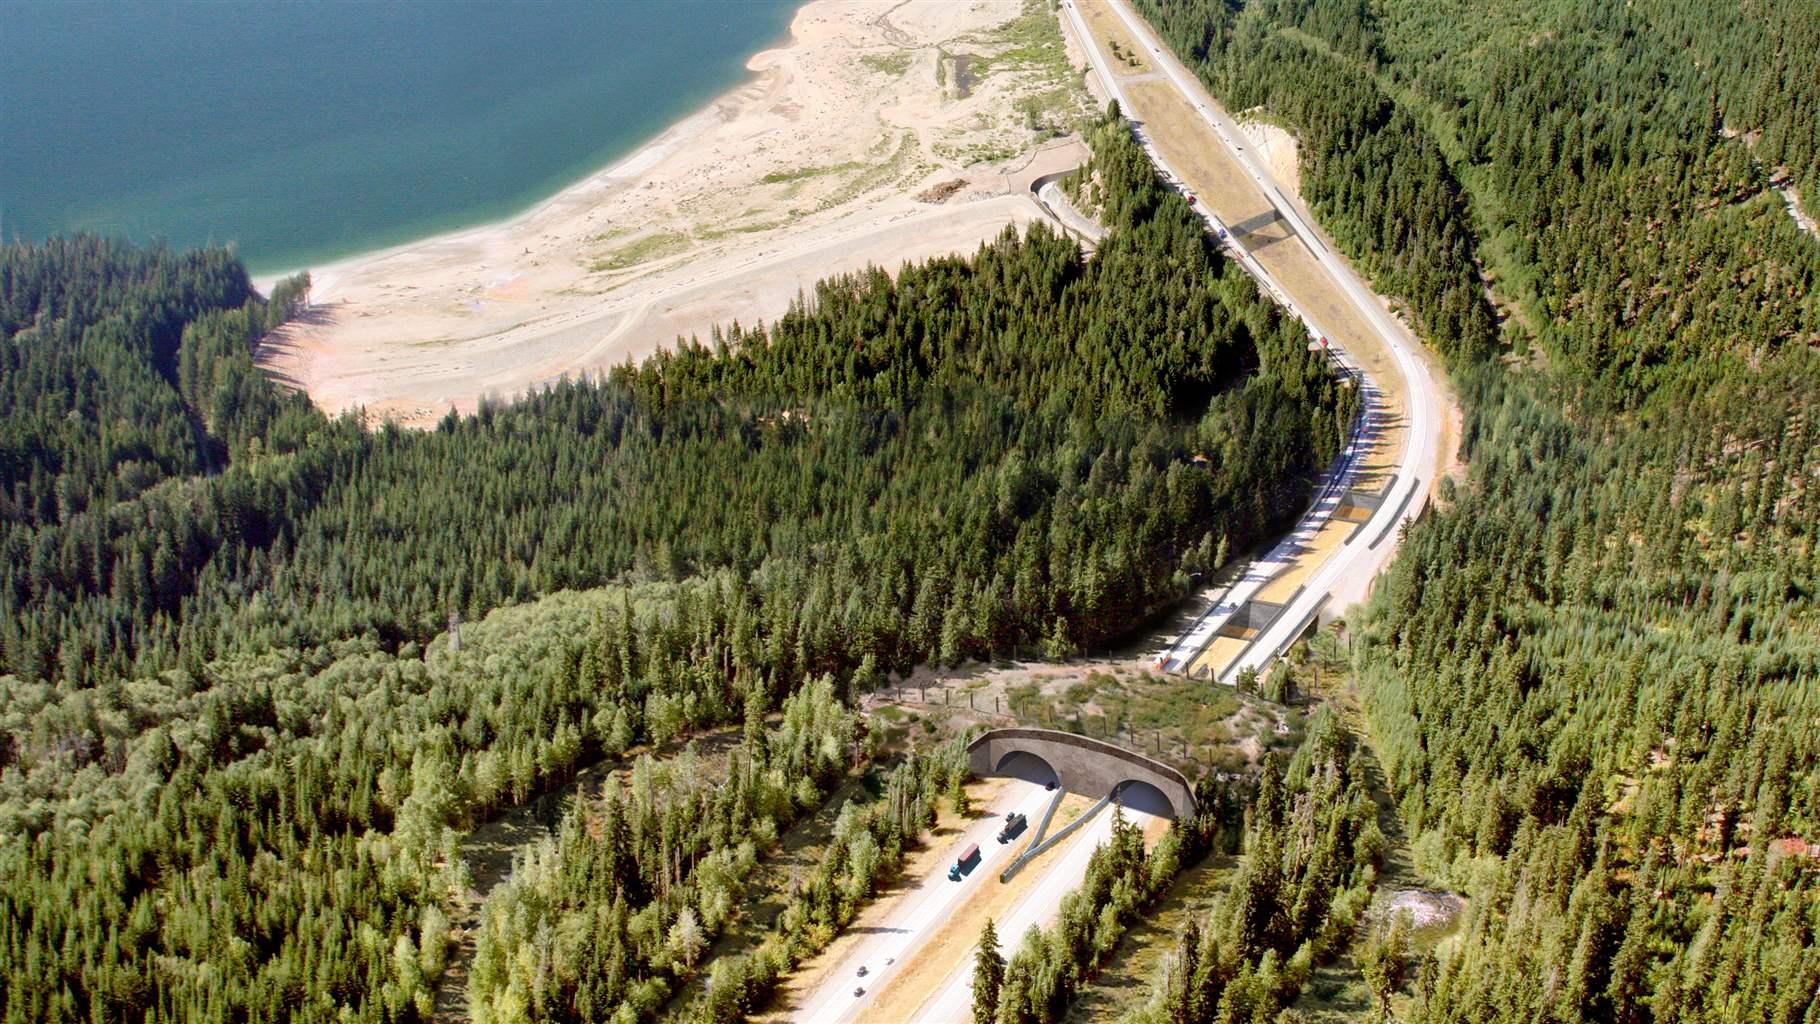 A bird’s-eye view shows a rendering of the Snoqualmie Pass wildlife overpass on I-90 in Washington, one of 27 structures that, when completed in 2029, will connect terrestrial and aquatic habitats along one of the busiest corridors in the Pacific Northwest.